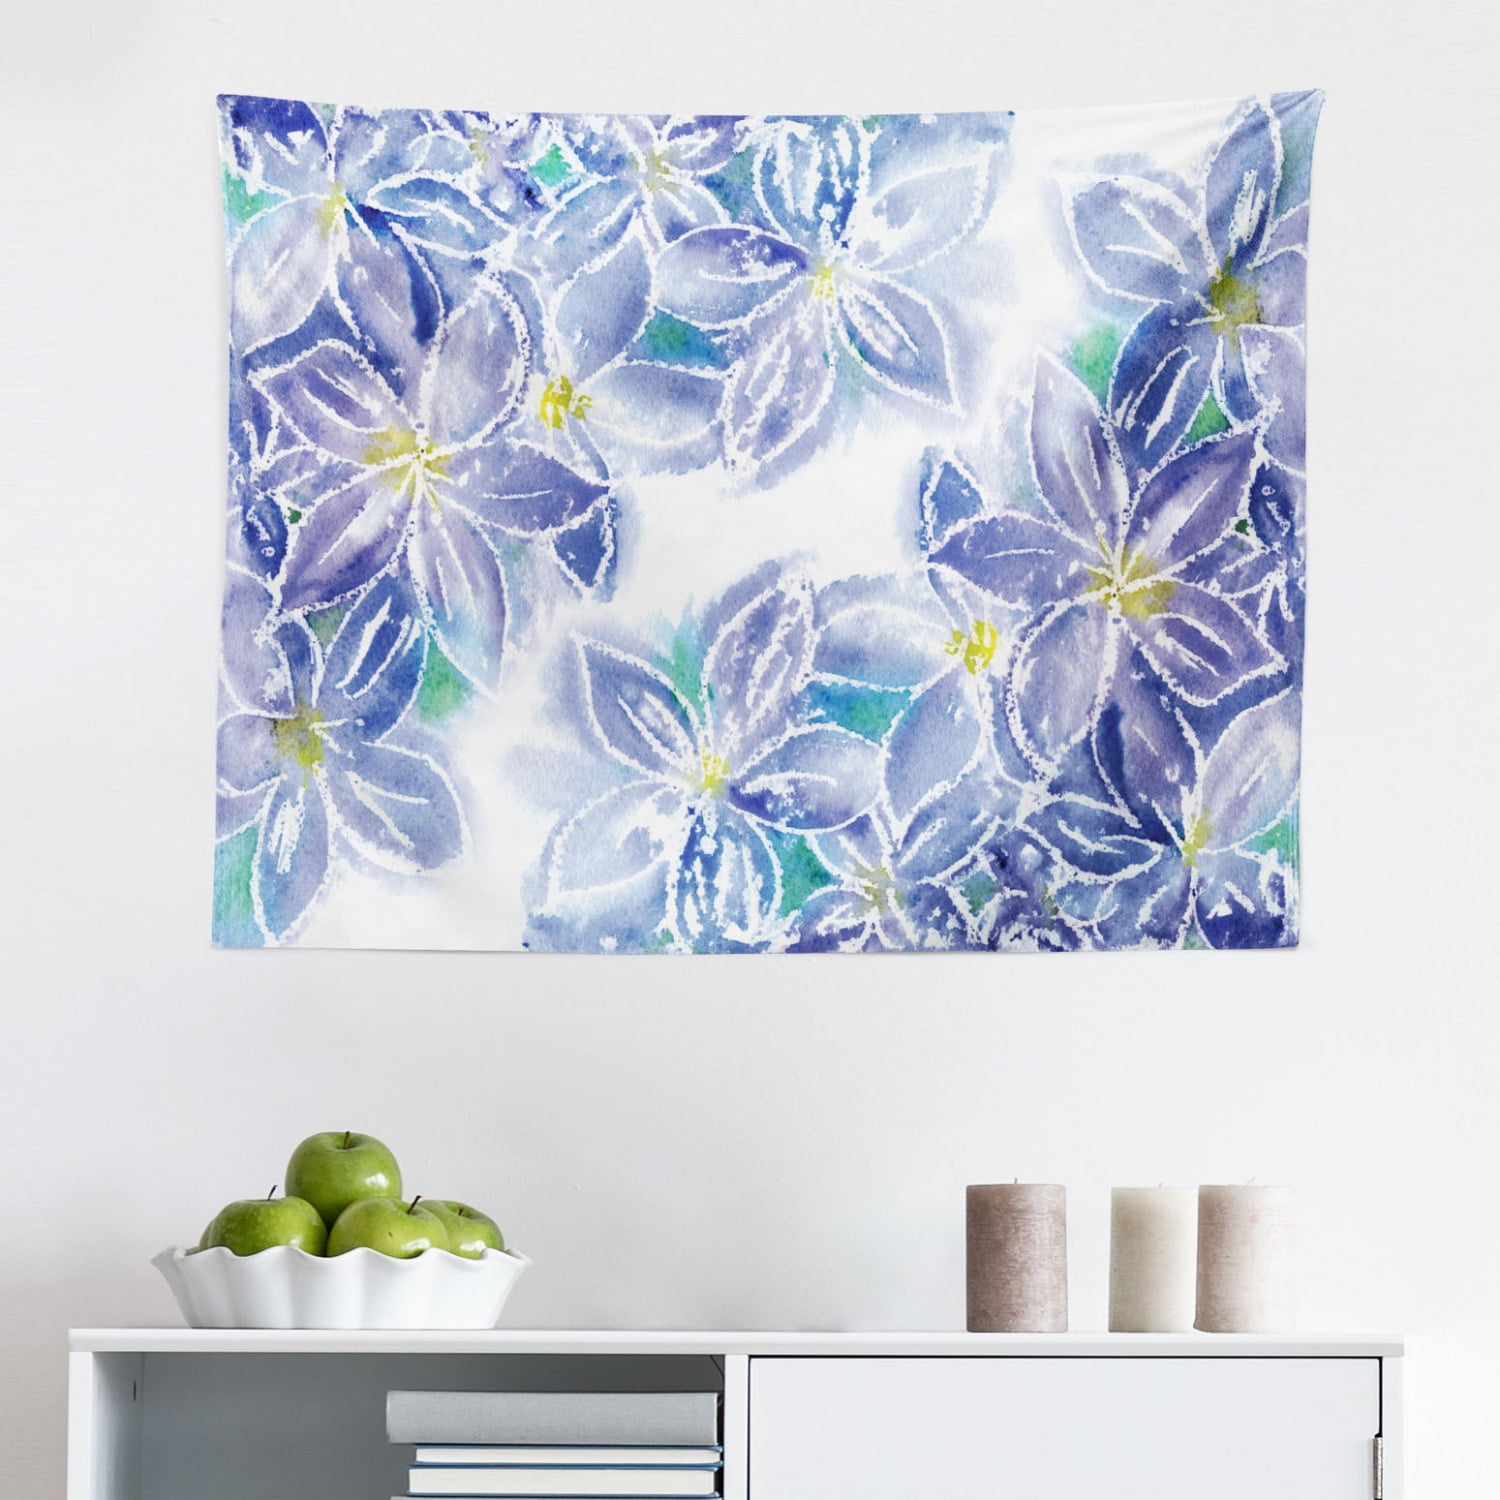 Ambesonne Watercolor Flower Tapestry, Fresh Curly Willow and Dahlia Floral Summer Buds Hand Drawn Print, Fabric Wall Hanging Decor for Bedroom Living Room Dorm